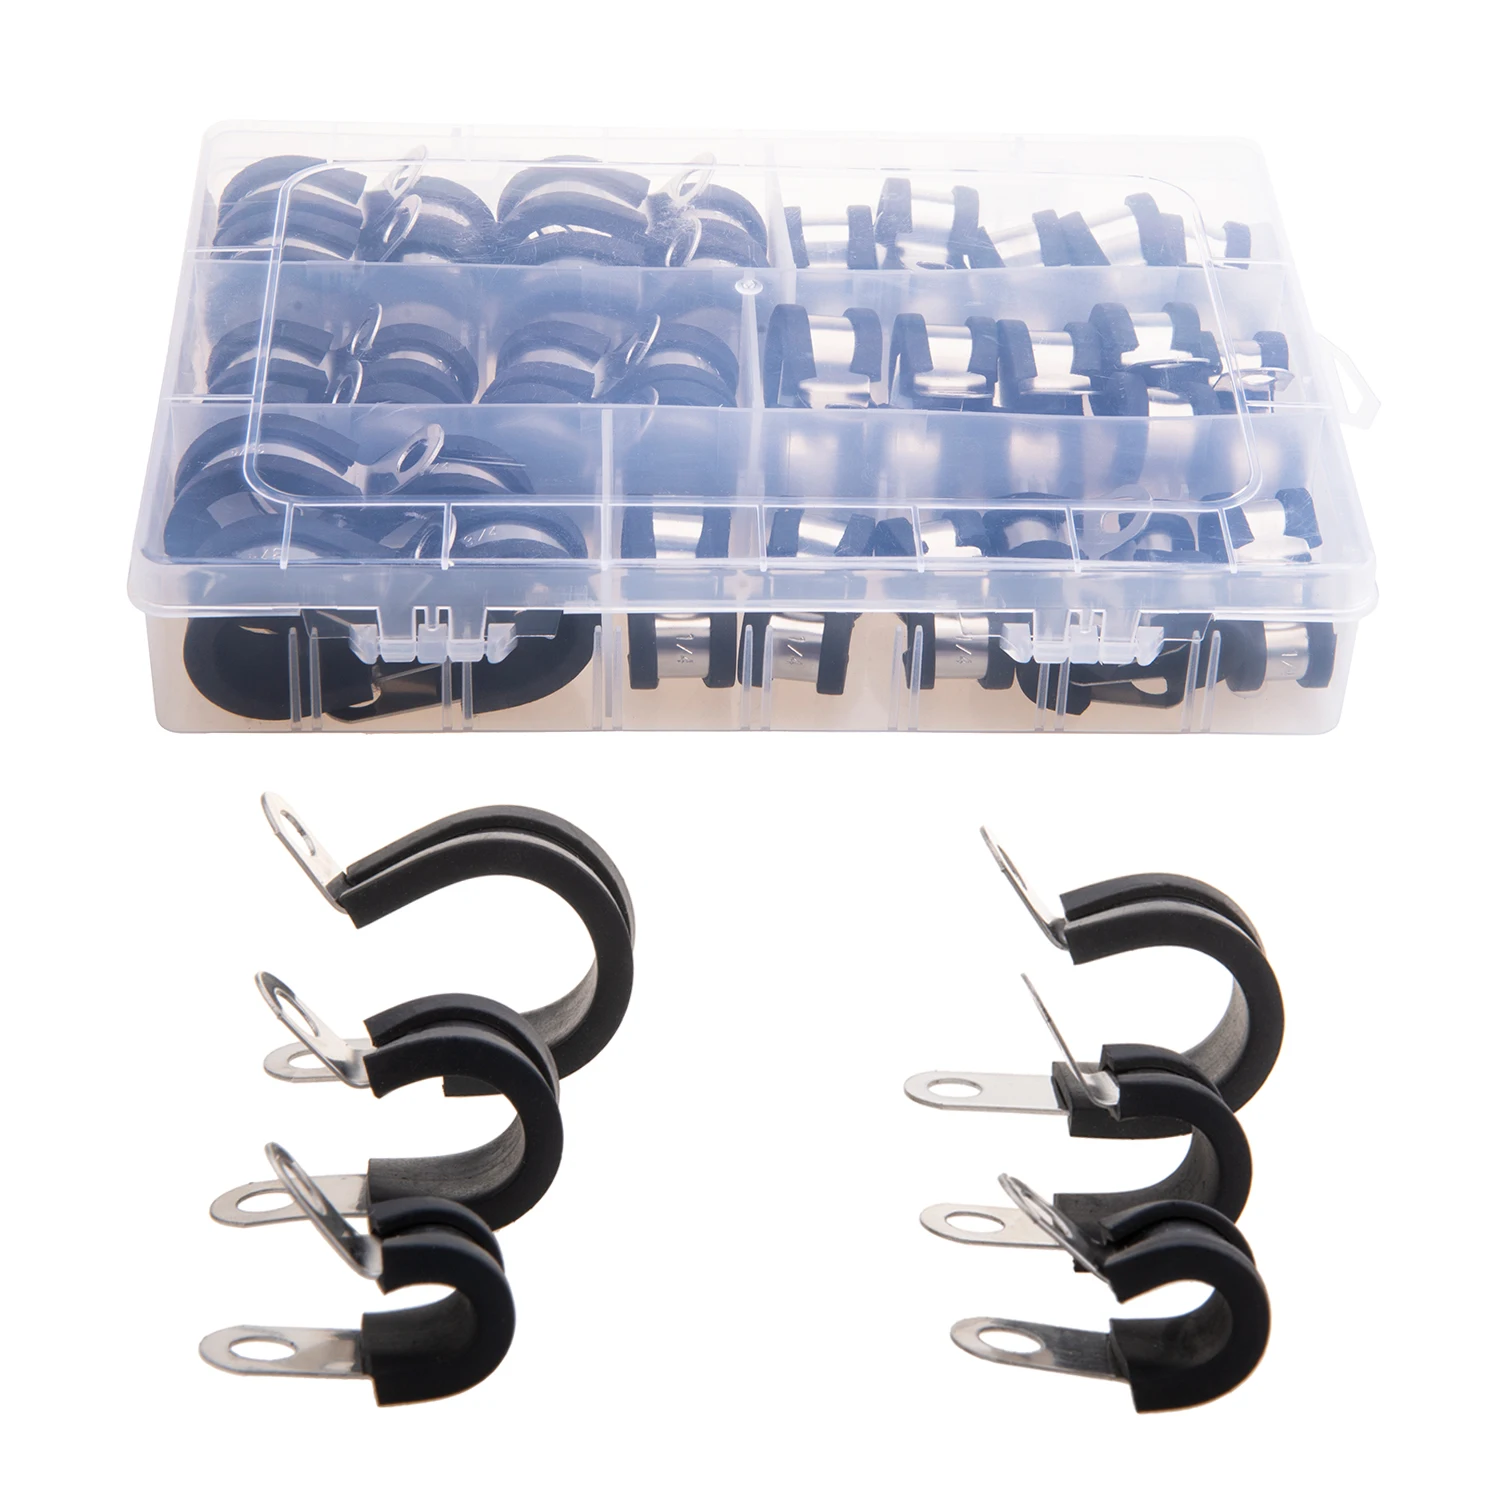 52PCS 6 Sizes Rubber Cushion Insulated Clamp Stainless Steel Metal Clamp Cable Clamp Tool Kit